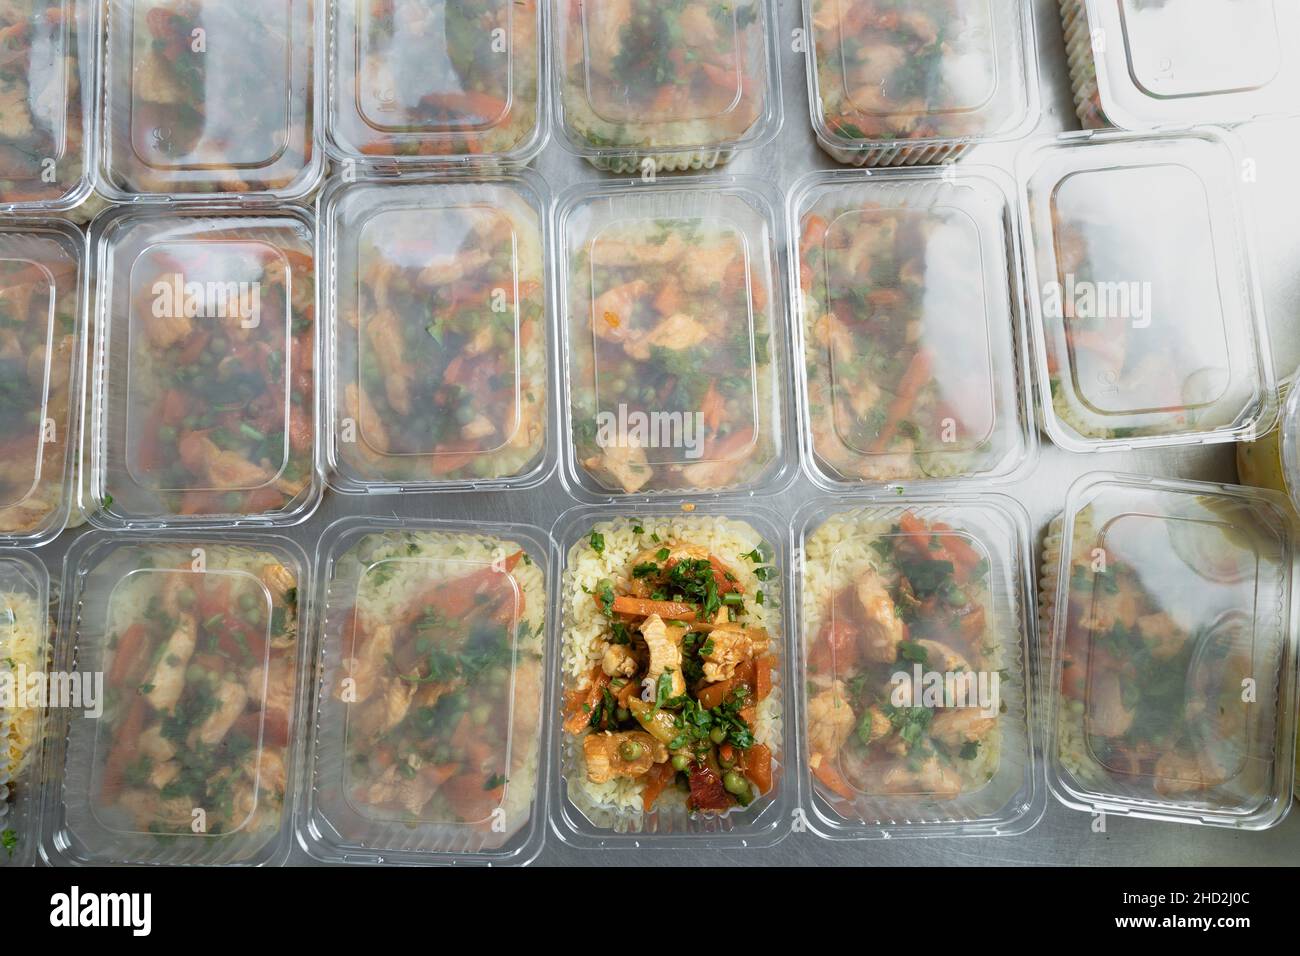 food delivery in the restaurant. Business lunch in an eco-friendly plastic container, ready for delivery. View from above. Office Lunch boxes with Stock Photo